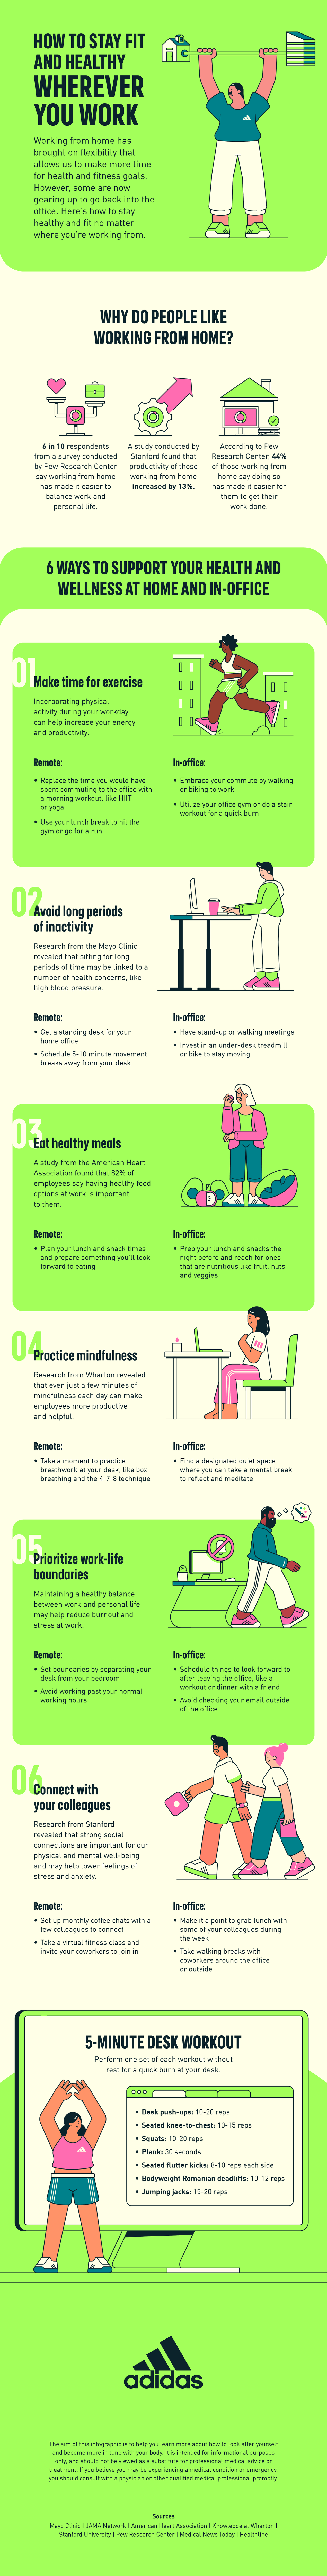 A long chart with different steps detailing how to stay healthy